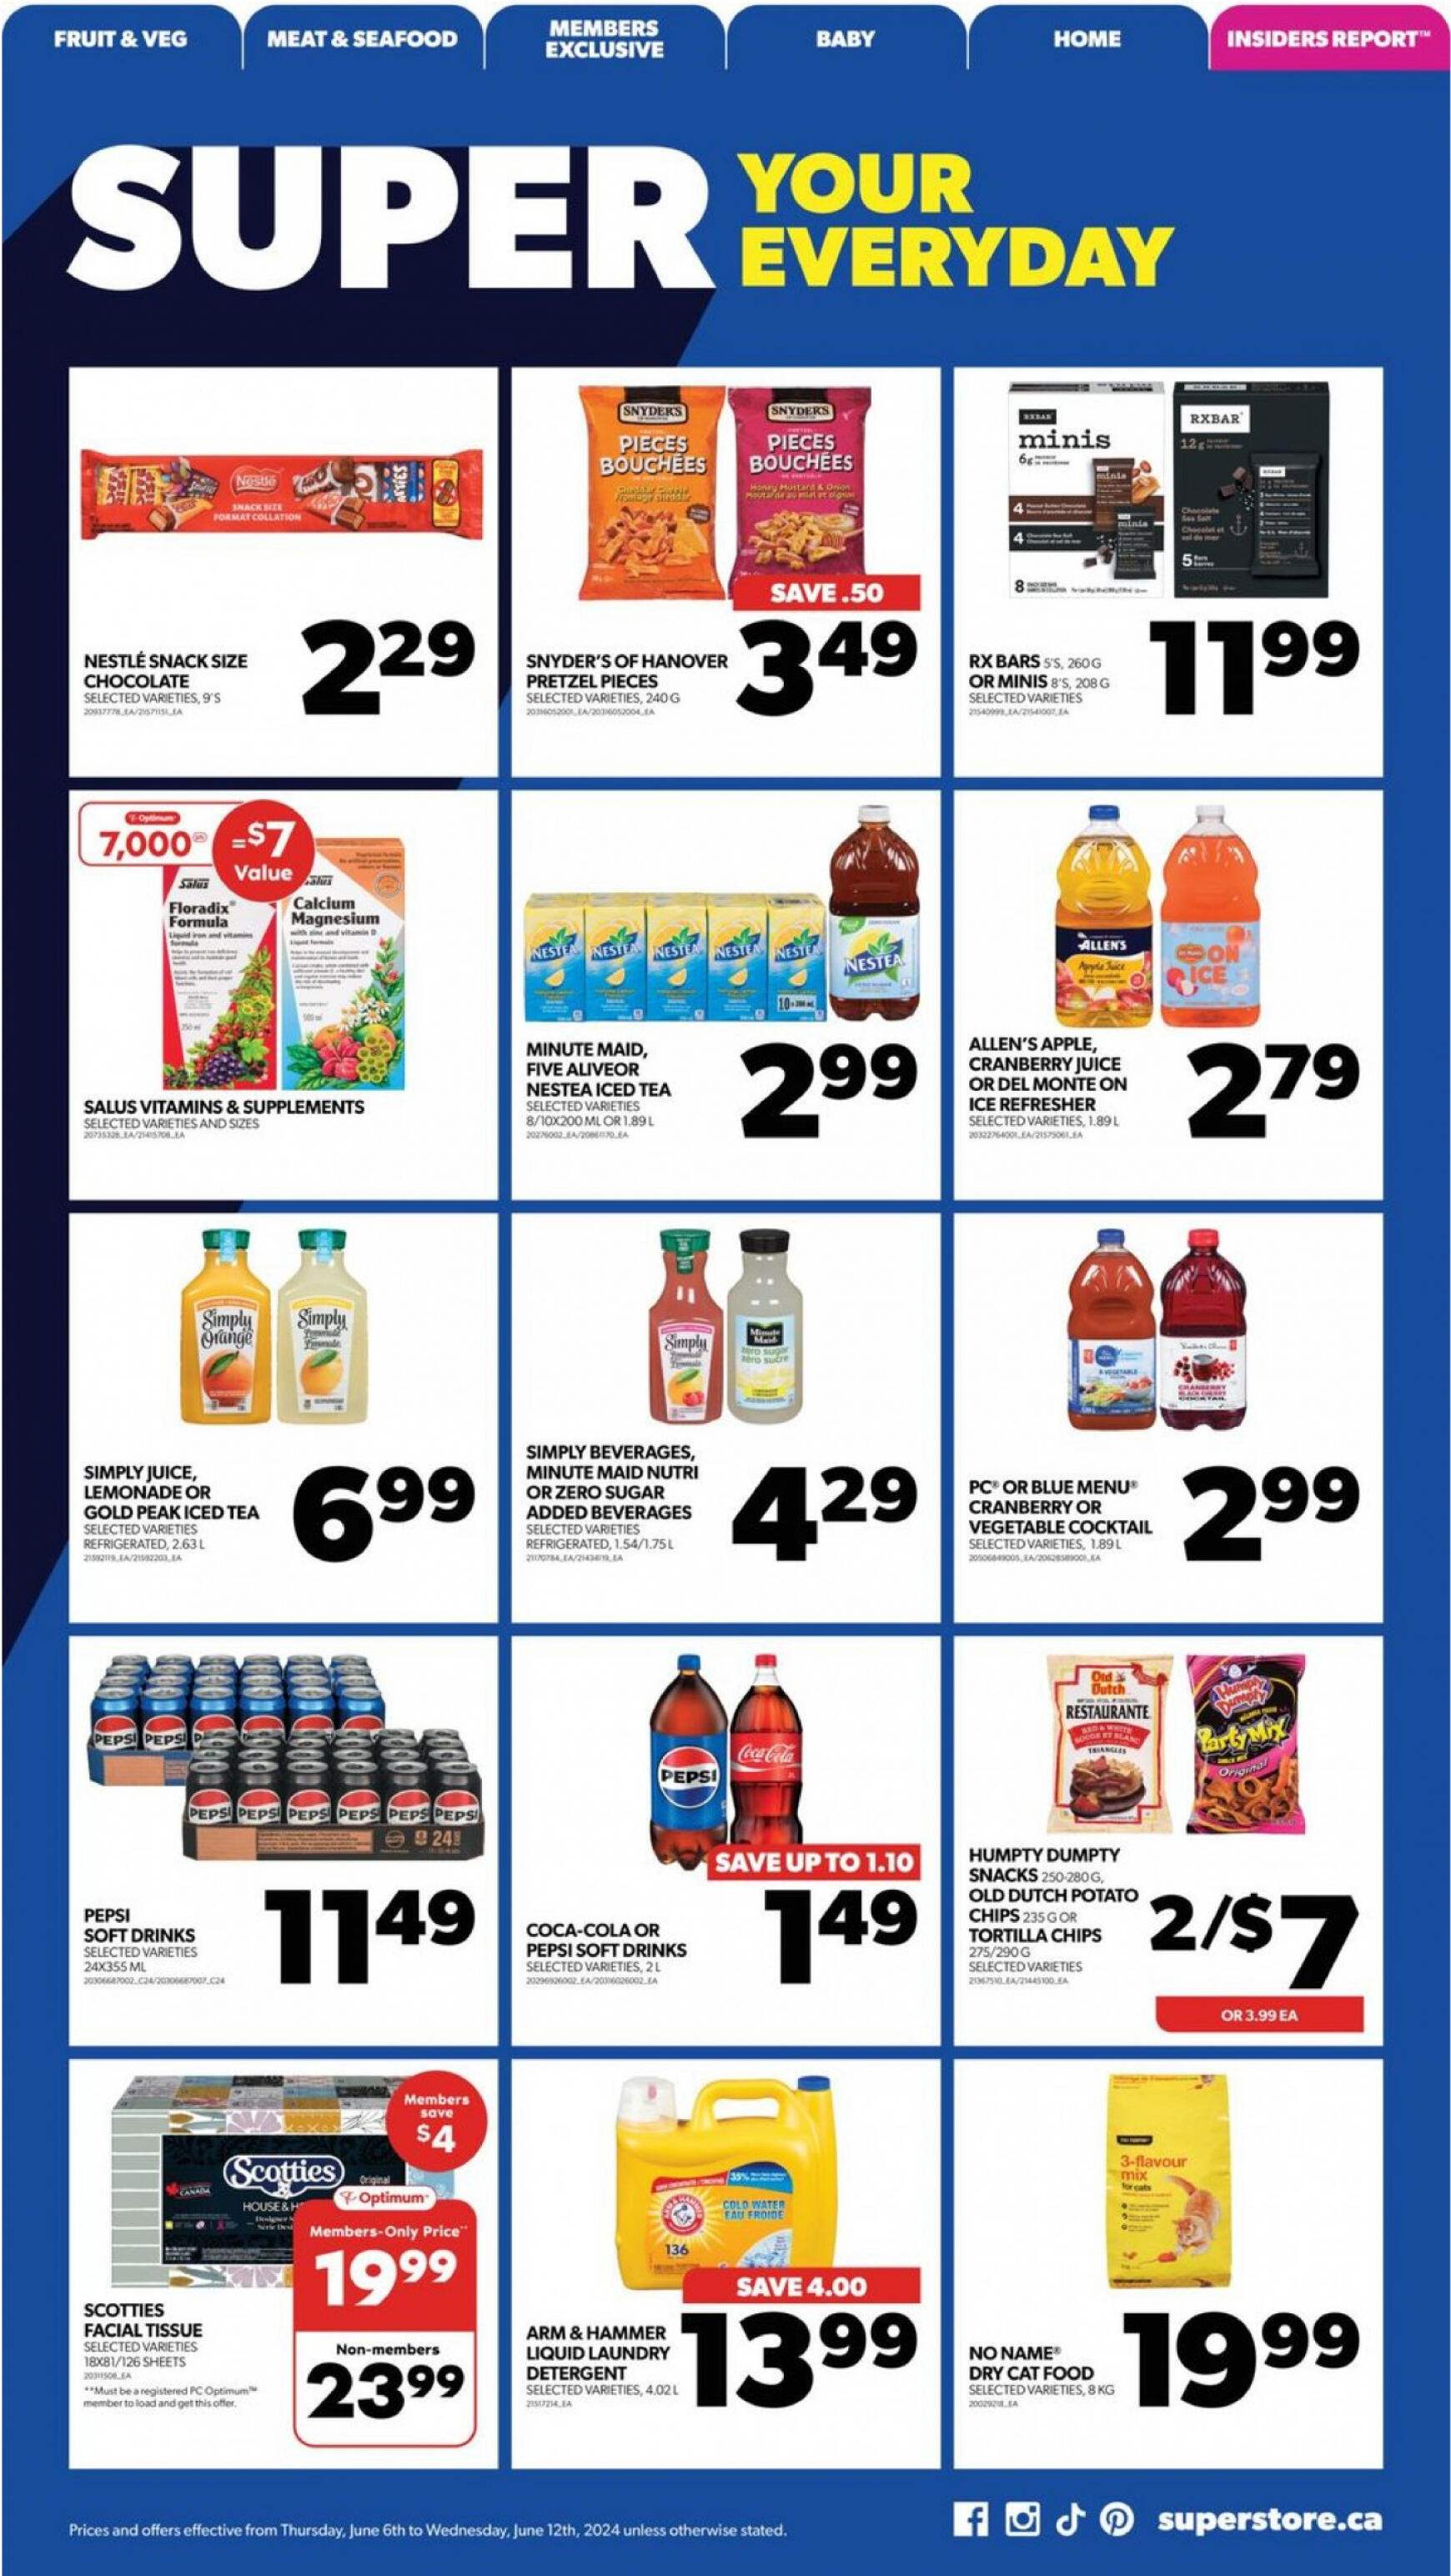 real-canadian-superstore - Real Canadian Superstore flyer current 06.06. - 12.06. - page: 17